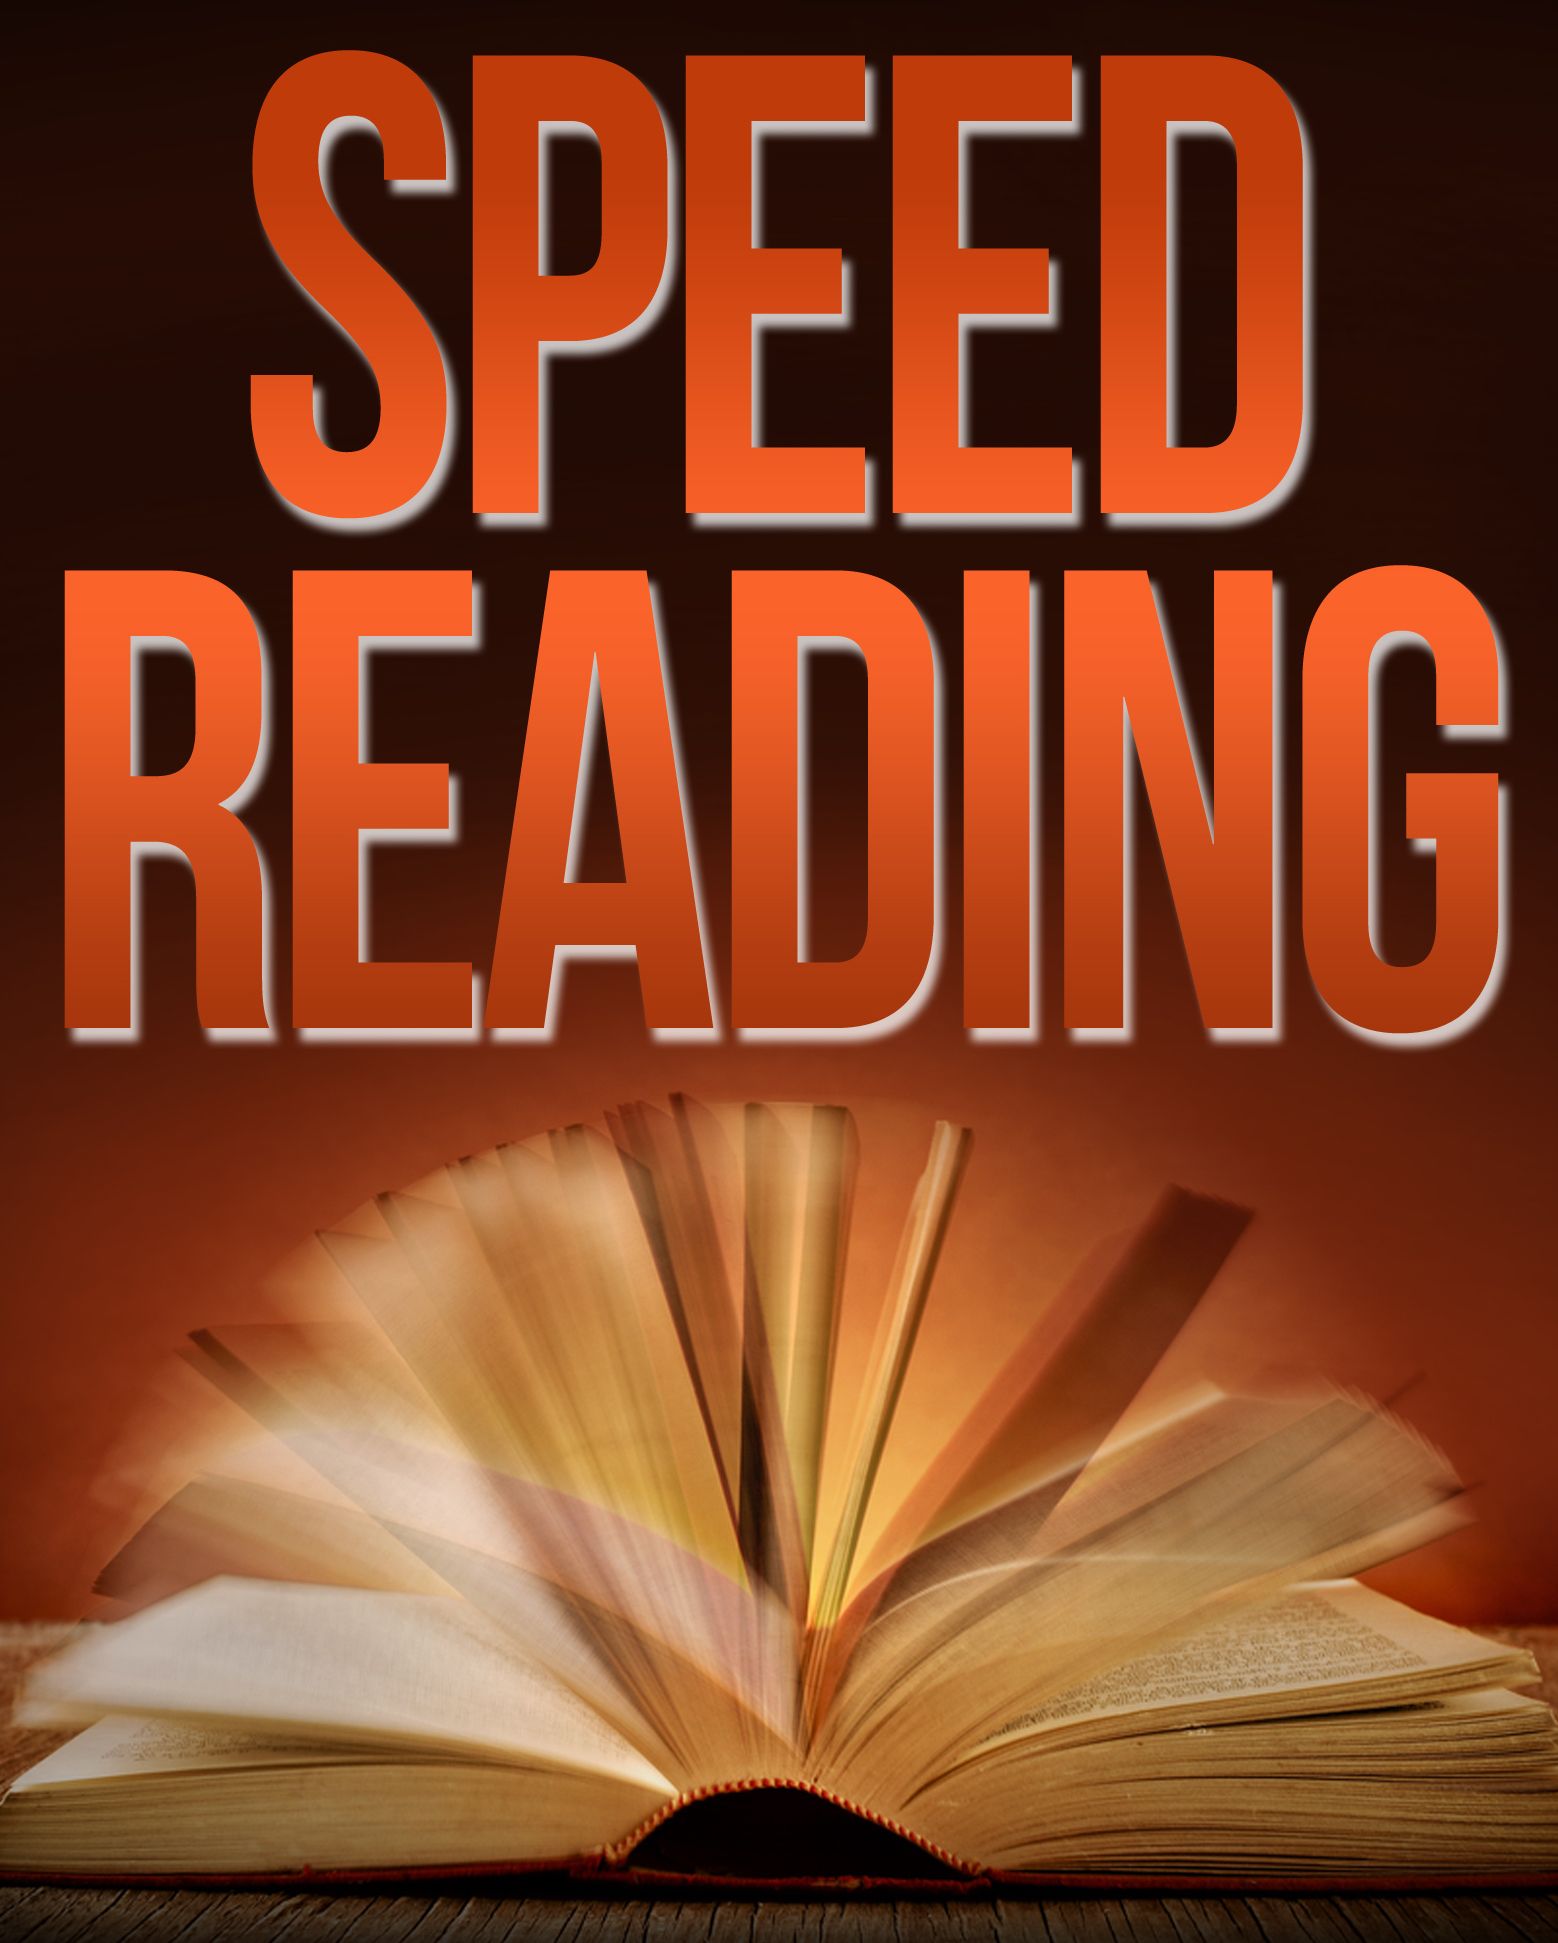 Bible Challenge. Speed reading is